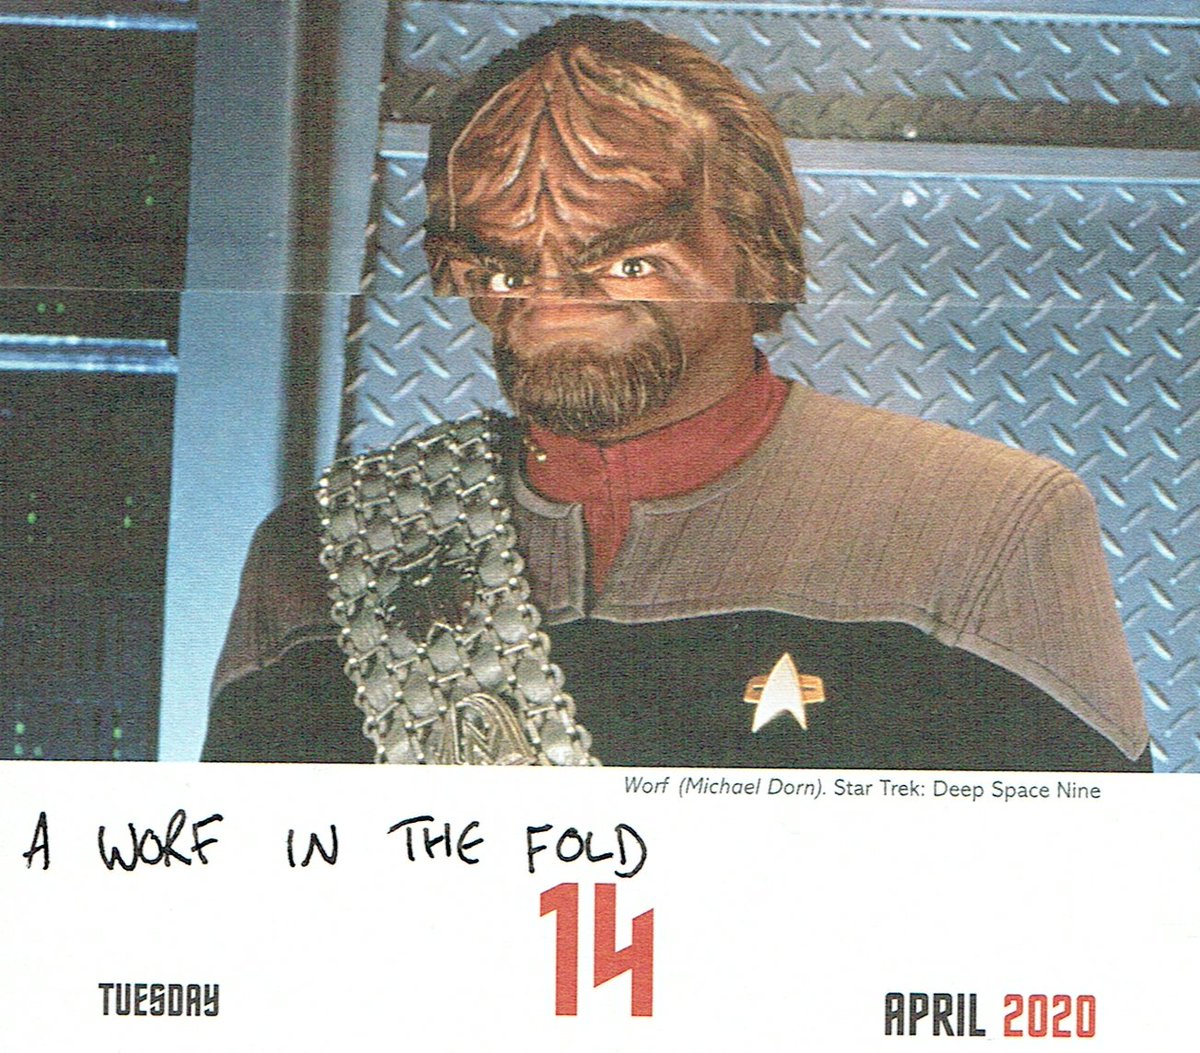 Reed & Tyler are intercepted by Worf aboard the Bird-of-Prey, just as they are about to be discovered by the Klingon warband. Worf plans to smuggle them to safety through a stable time fracture. Before he can implement his plan, time warps and folds around him pulling him into...